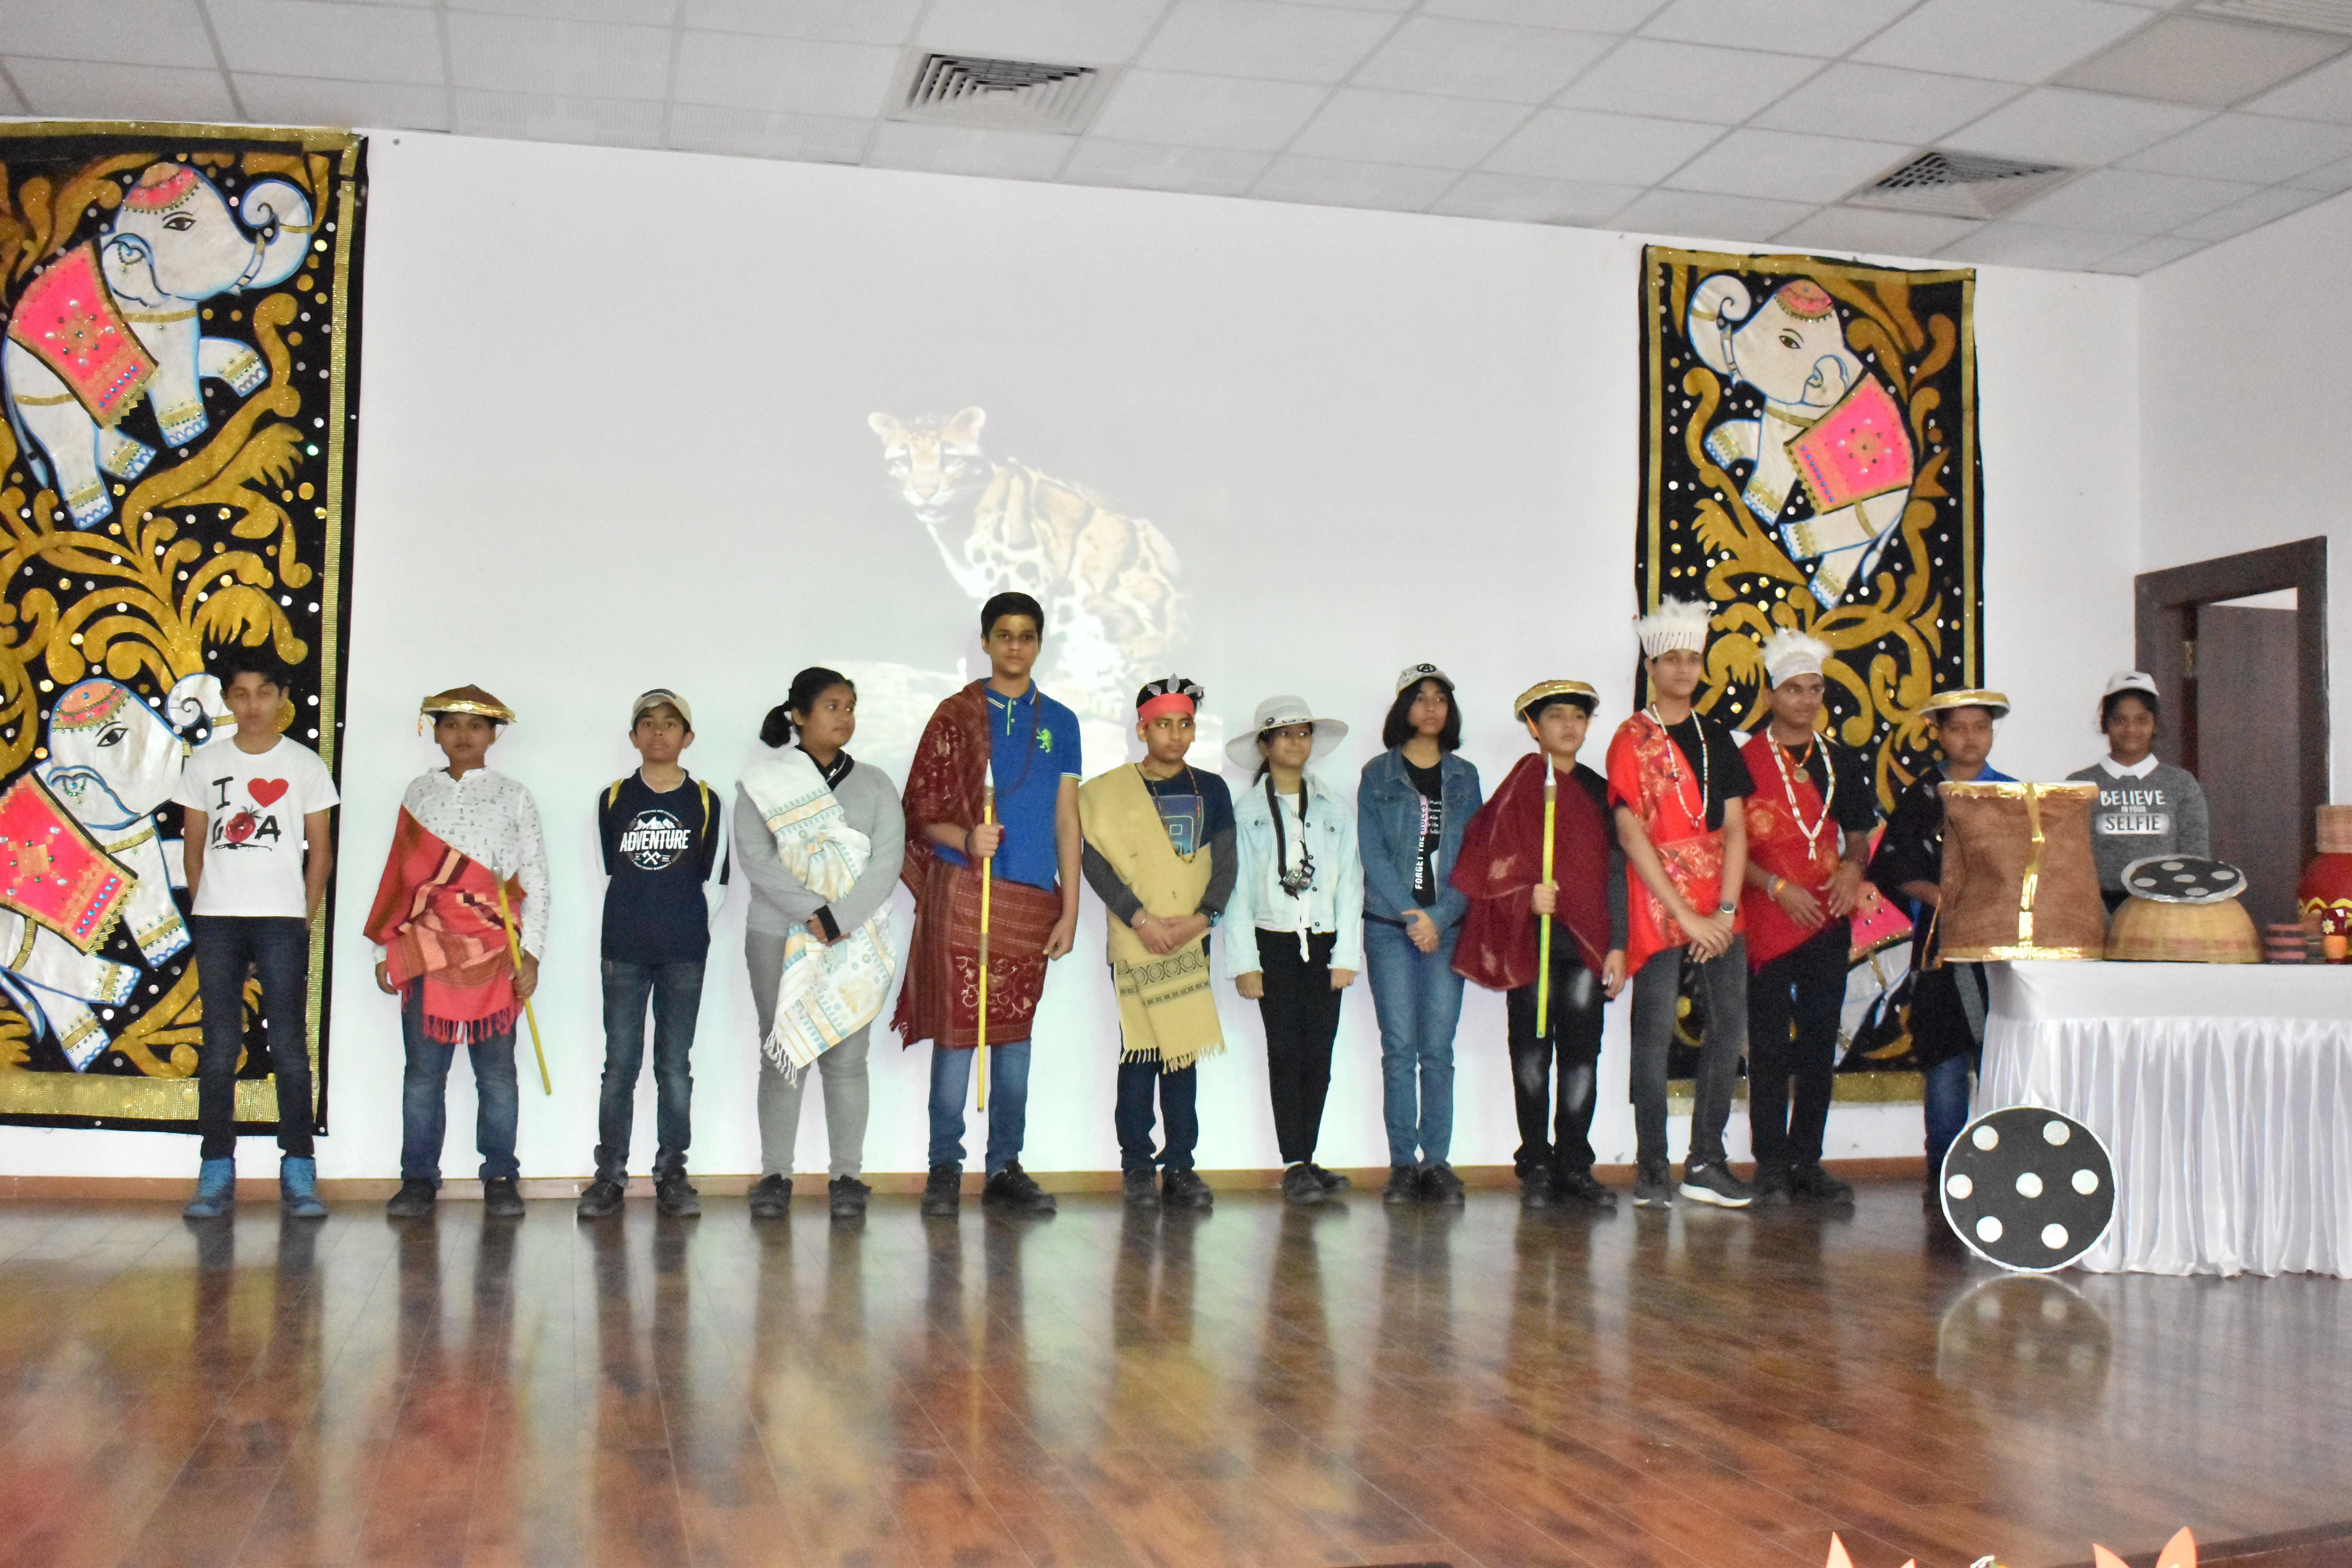 Abhimanyu house presented the assembly on the topic Nagaland: The tribal state